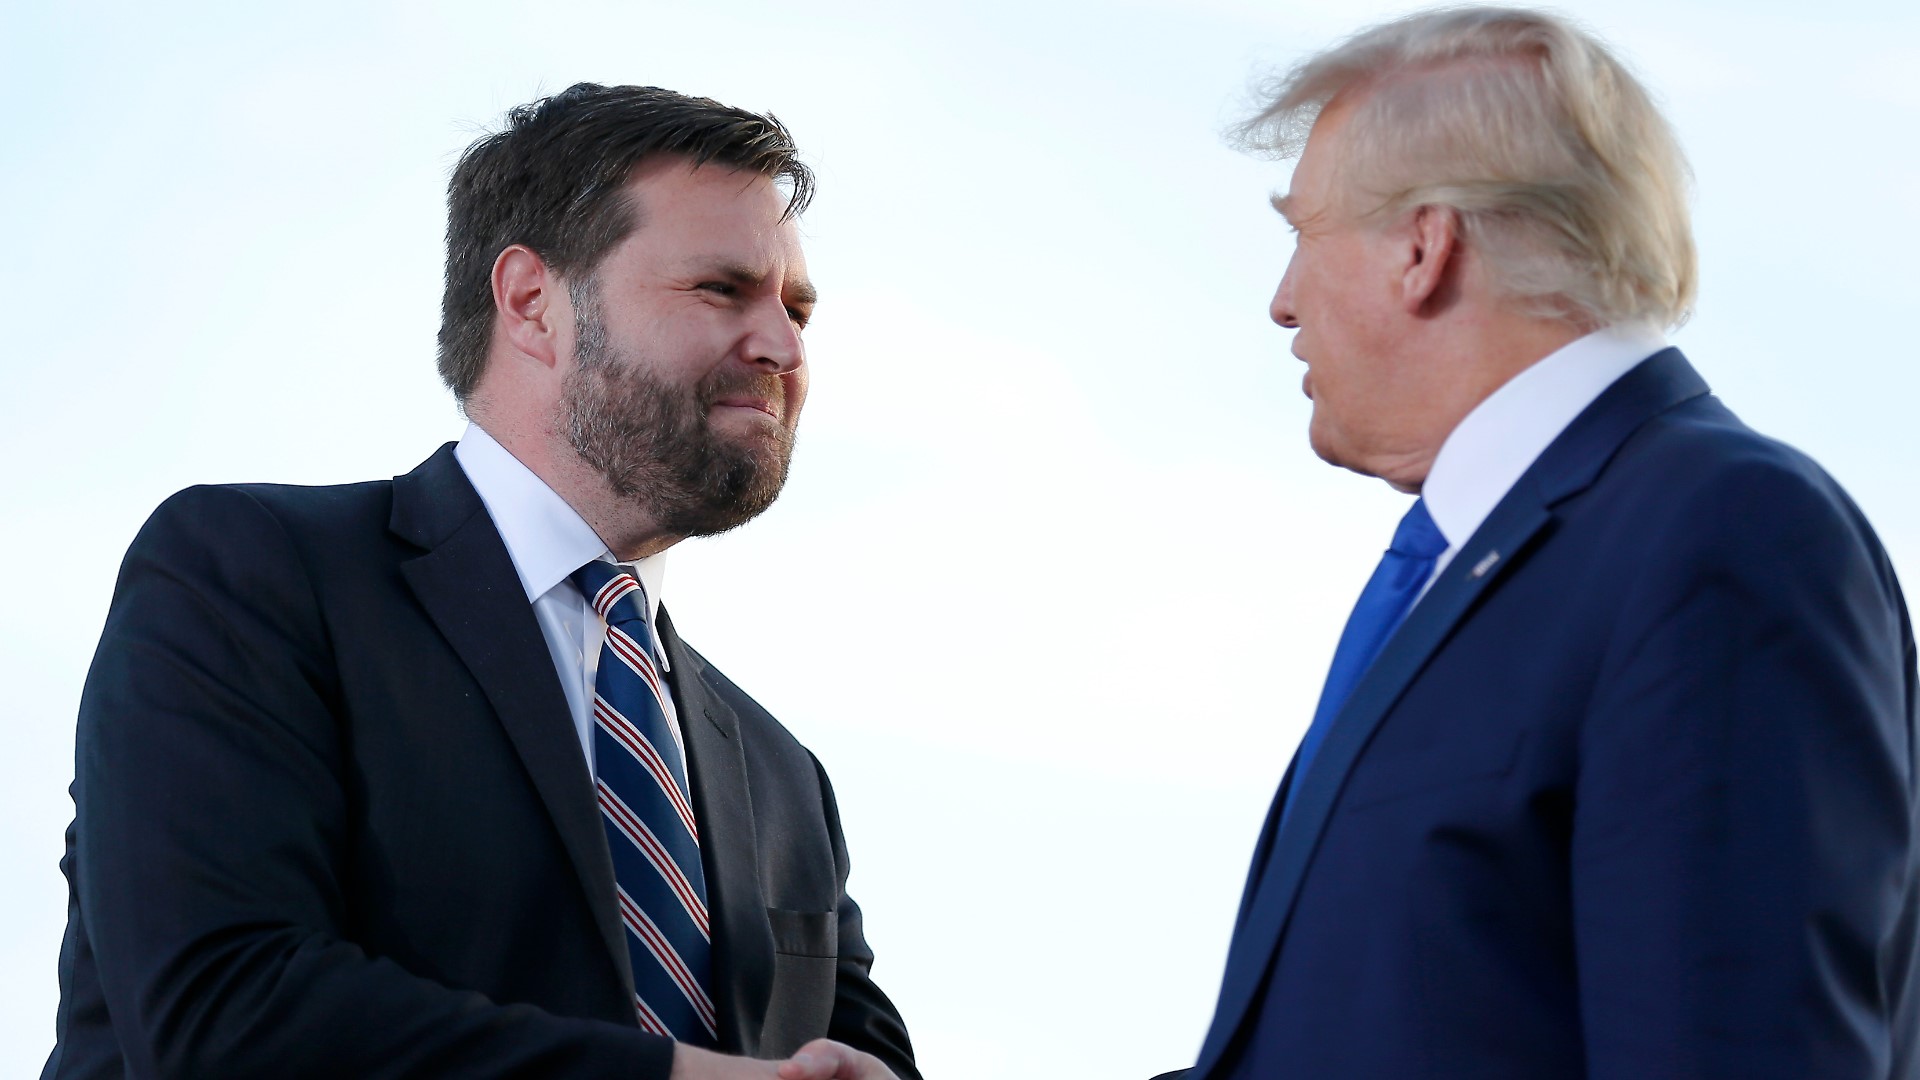 In Ohio, Trump's support has already been a major boon to JD Vance, who had been trailing in the polls before Trump’s intervention.